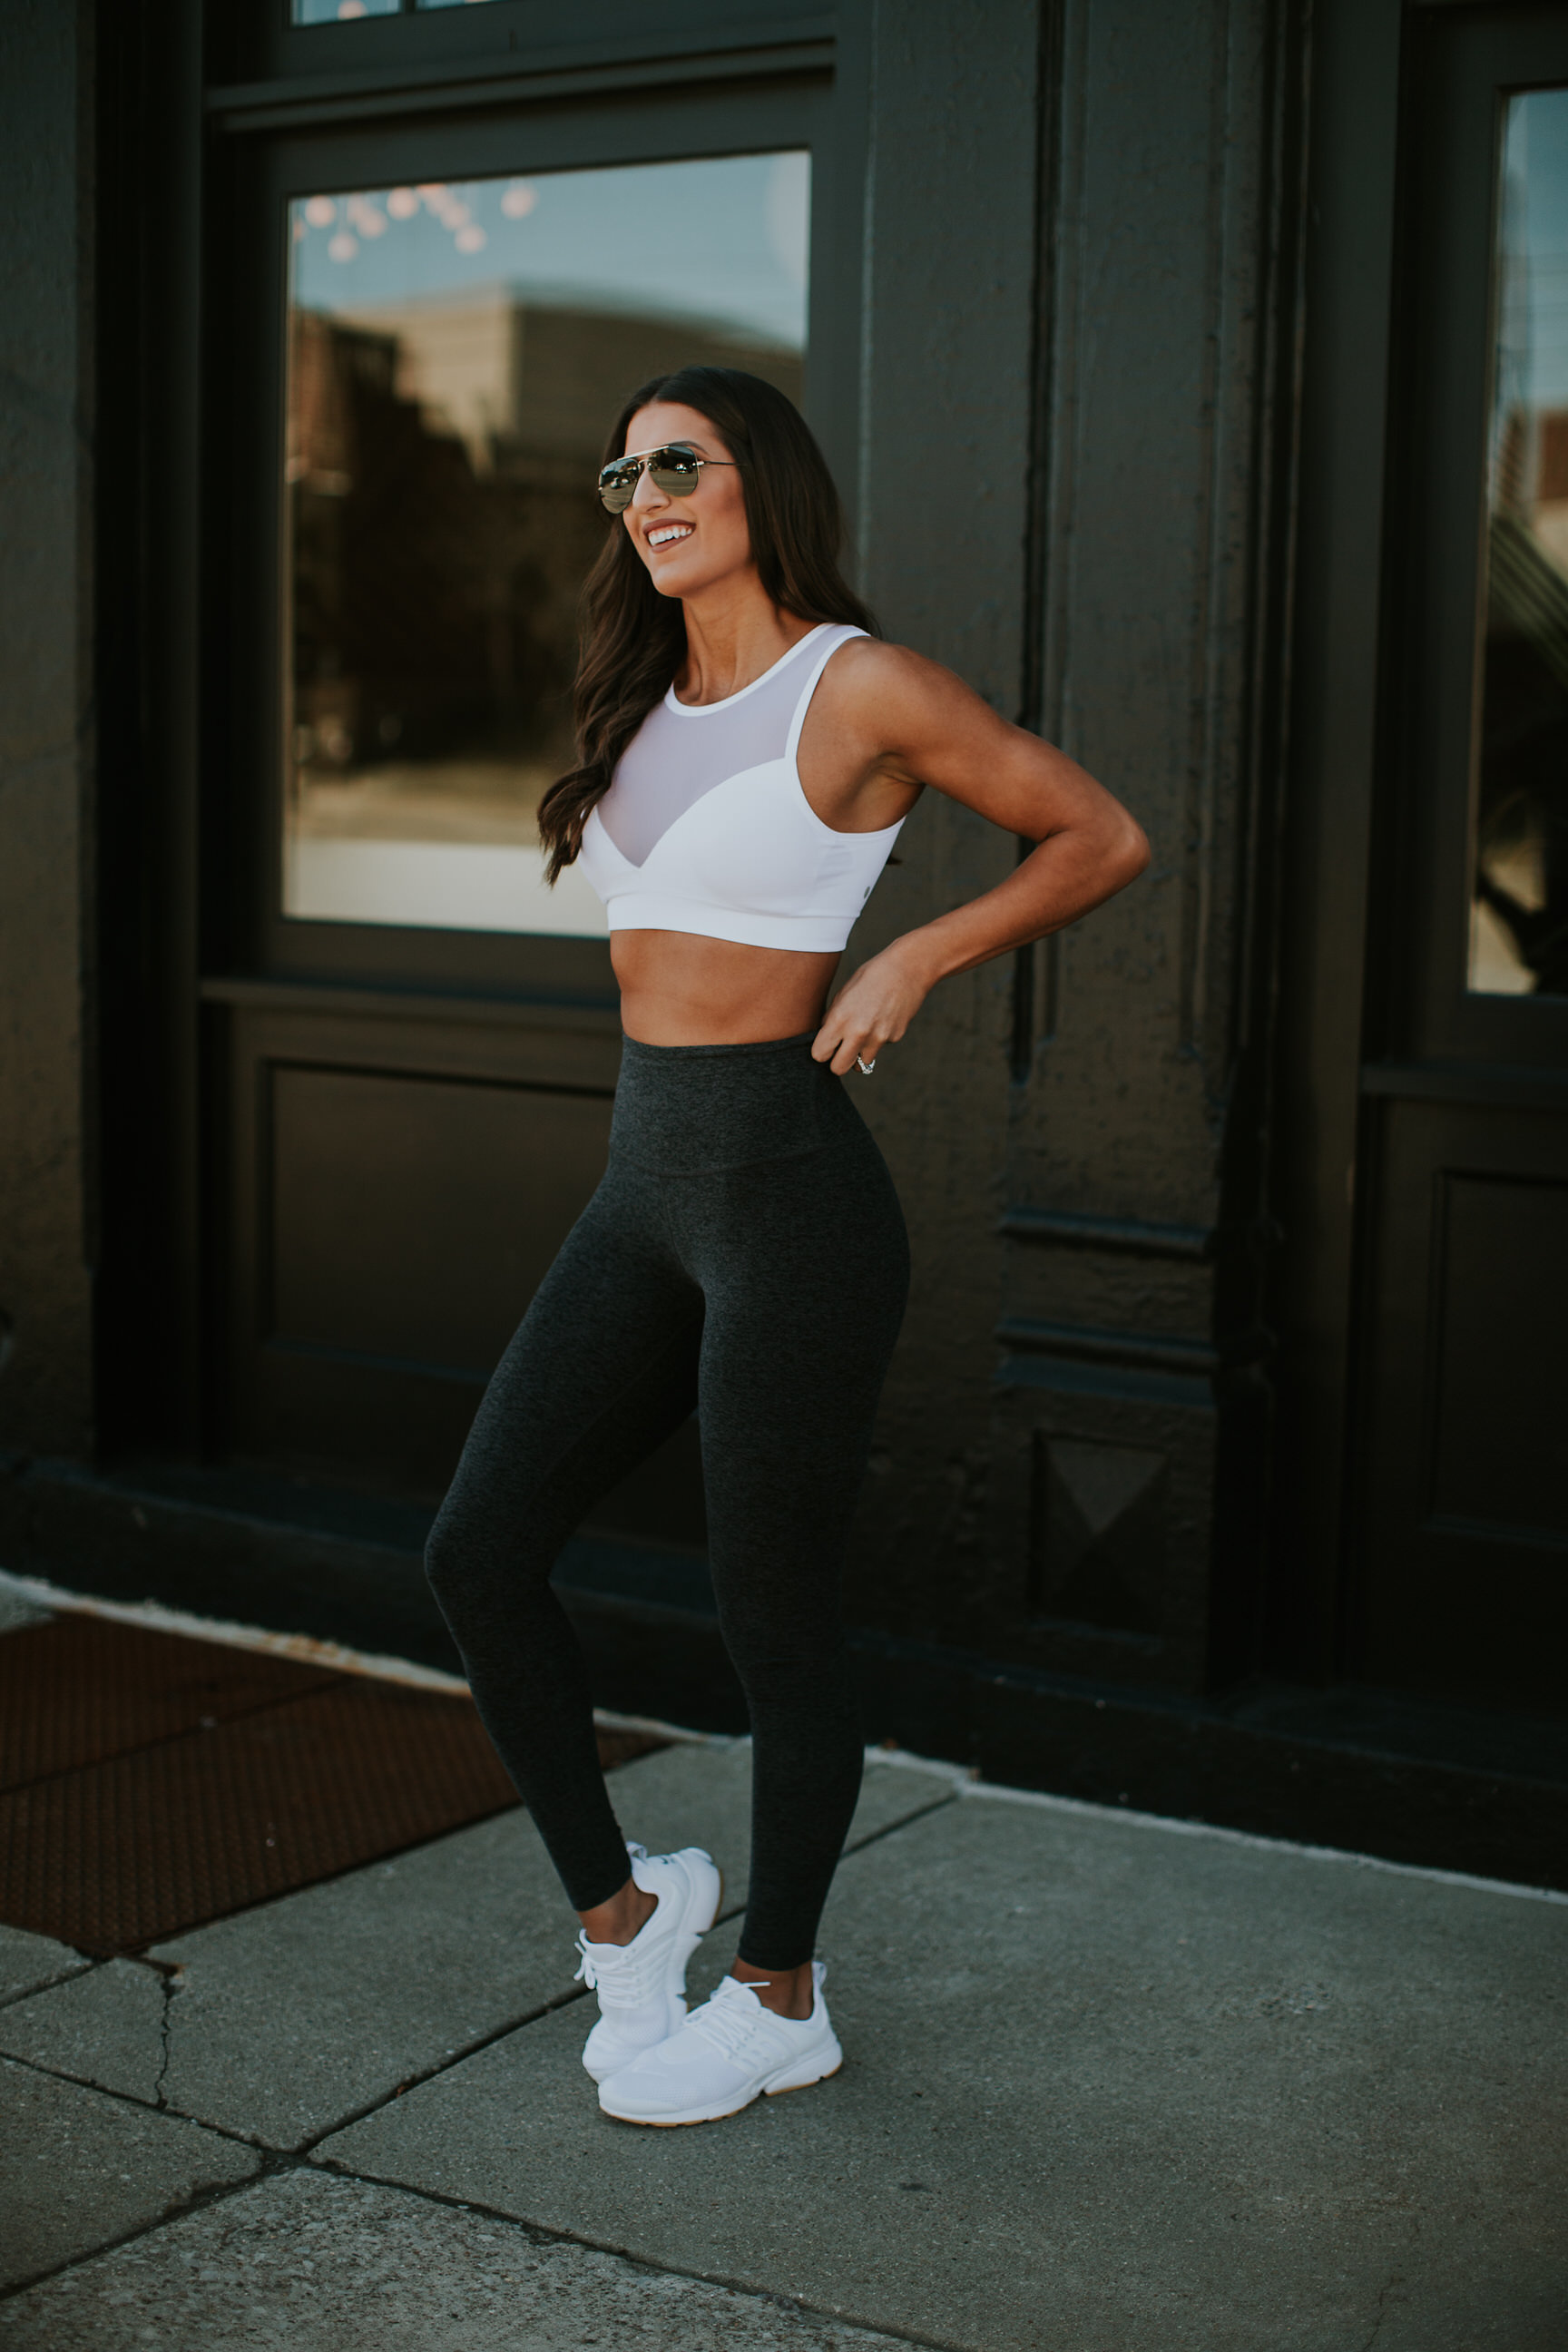 mesh sports bra, high waist leggings, beyond yoga space dye leggings, beyond yoga leggings, nike sneakers, nike air presto sneakers, ray ban blaze aviators, zella bomber jacket, athleisure bomber jacket, zella activewear, nordstrom activewear, beyond yoga activewear, beyond yoga outfit, beyond yoga high waist leggings, nike roshe sneakers, nike roshe one sneakers, nike sneakers, spacedye leggings, workout routines, exercise routine, girl gains, fitwithasd, fit with asd workouts, workout routines, leg exercises, leg day, cute actiewear, cute athleisure, activewear crop top, a southern drawl fitness, fitspiration, leg workout guide // grace wainwright a southern drawl